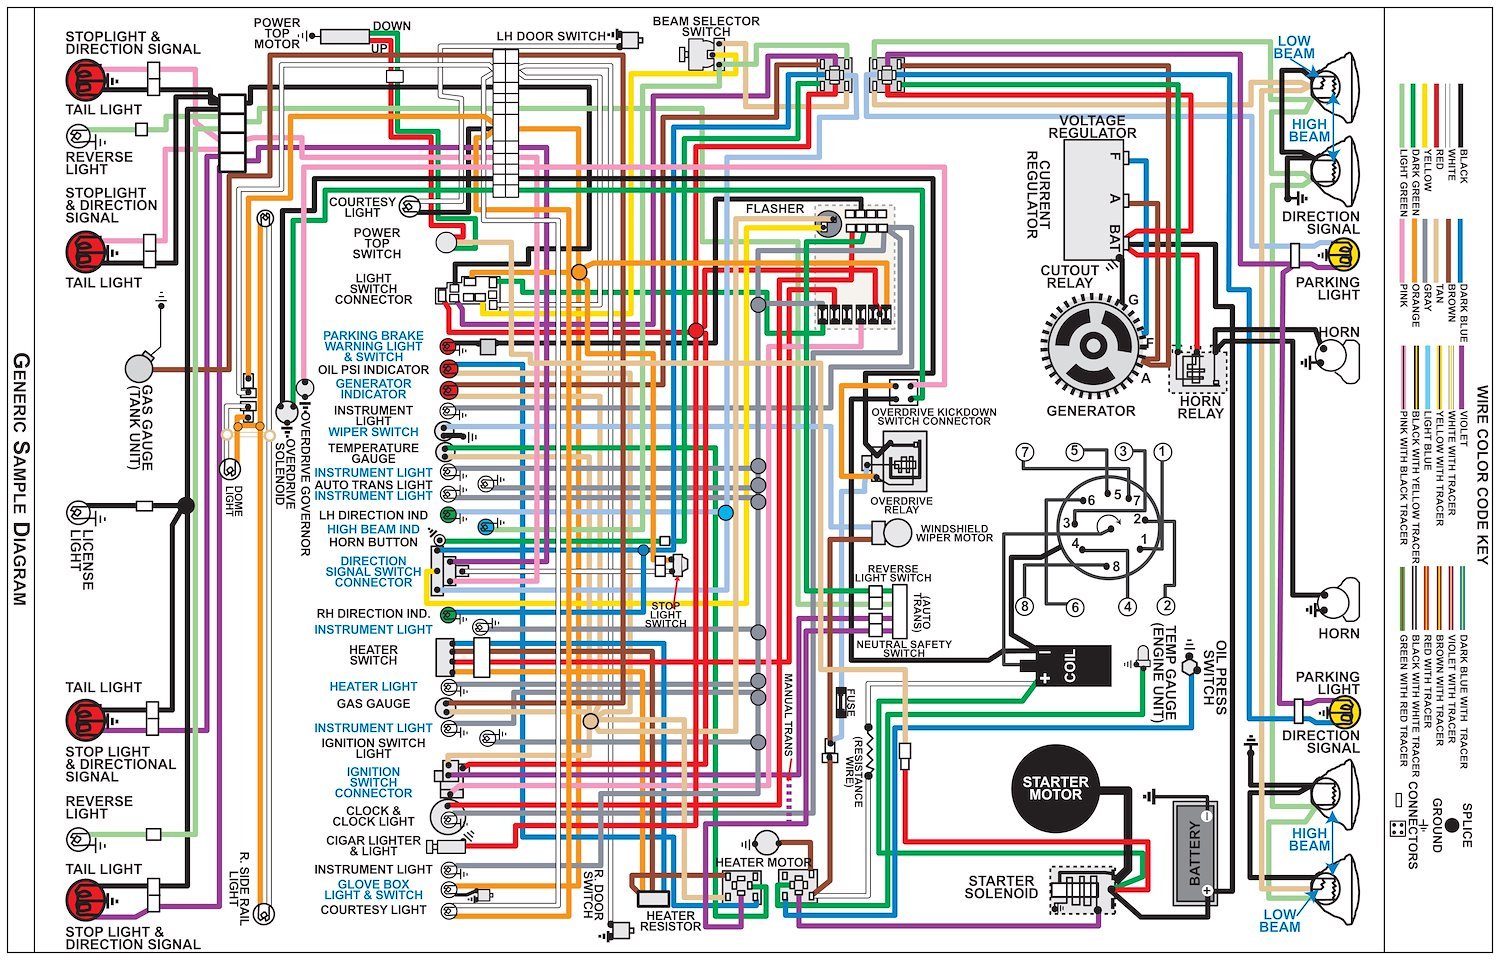 Wiring Diagram for 1966 Cadillac, 11 in. x 17 in., Laminated